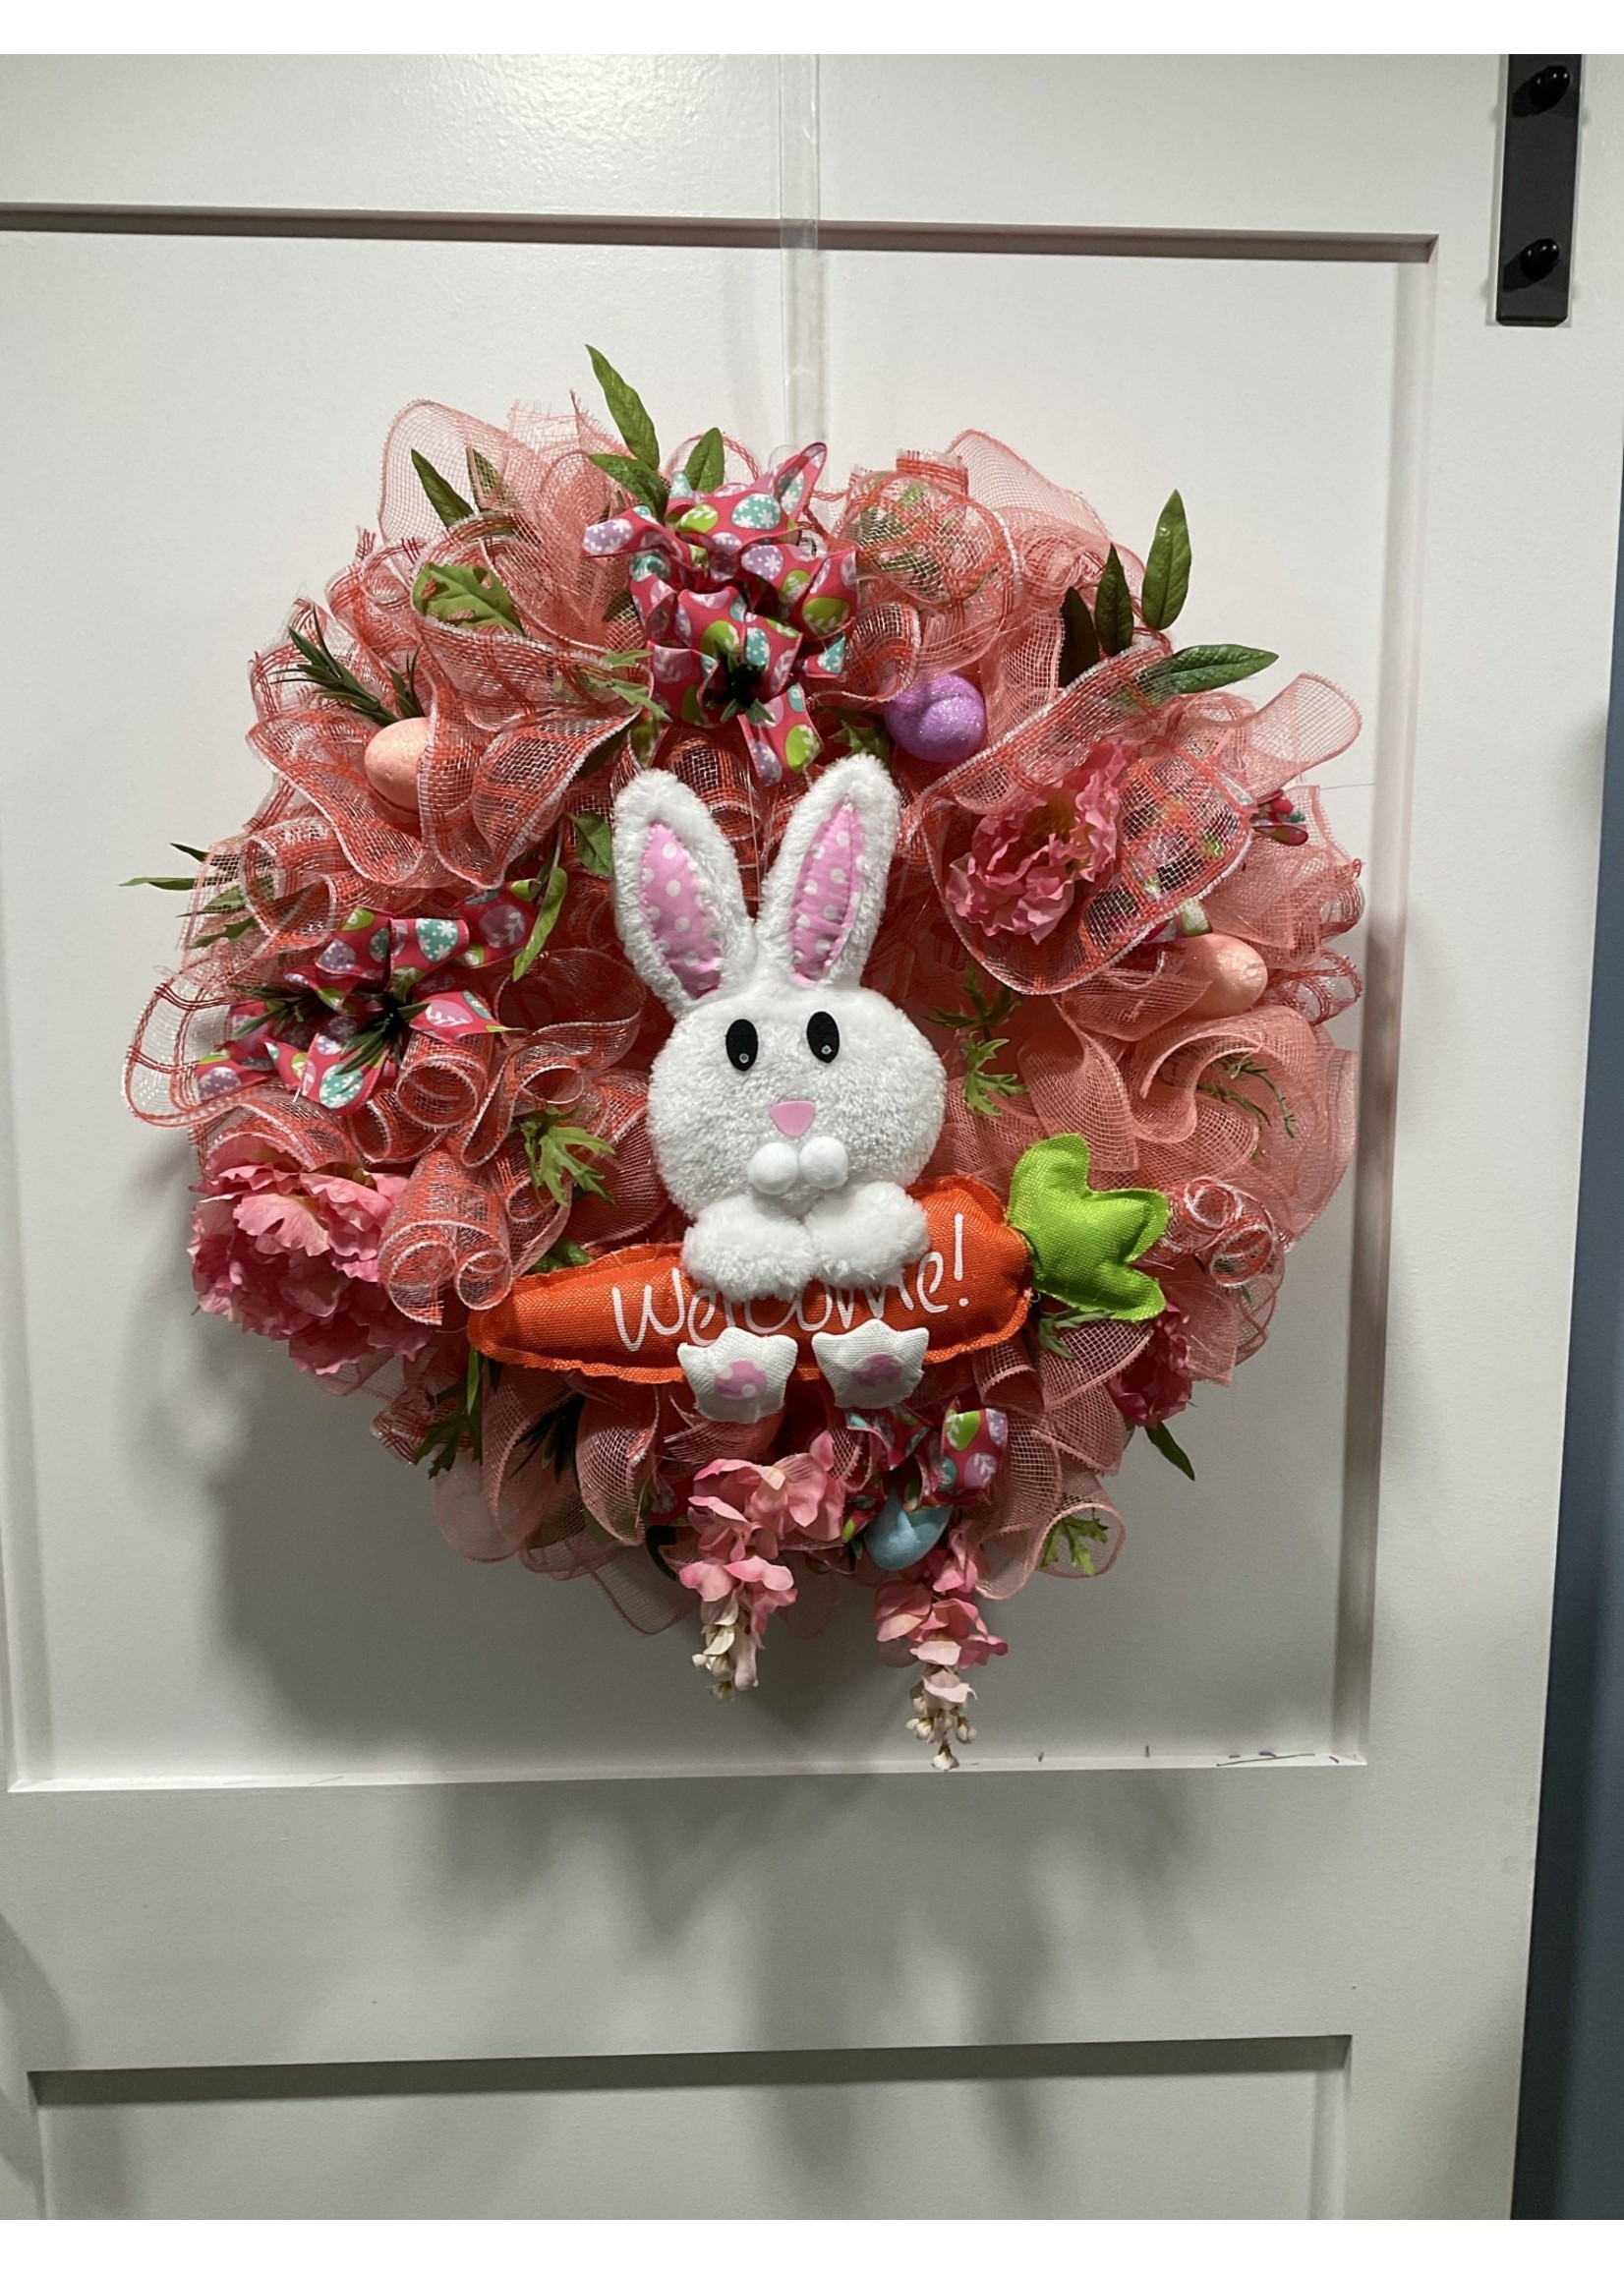 My New Favorite Thing 386 Wreath Mesh 26 in-Peach "Rabbit Welcome" w/Easter Egg Ribbon